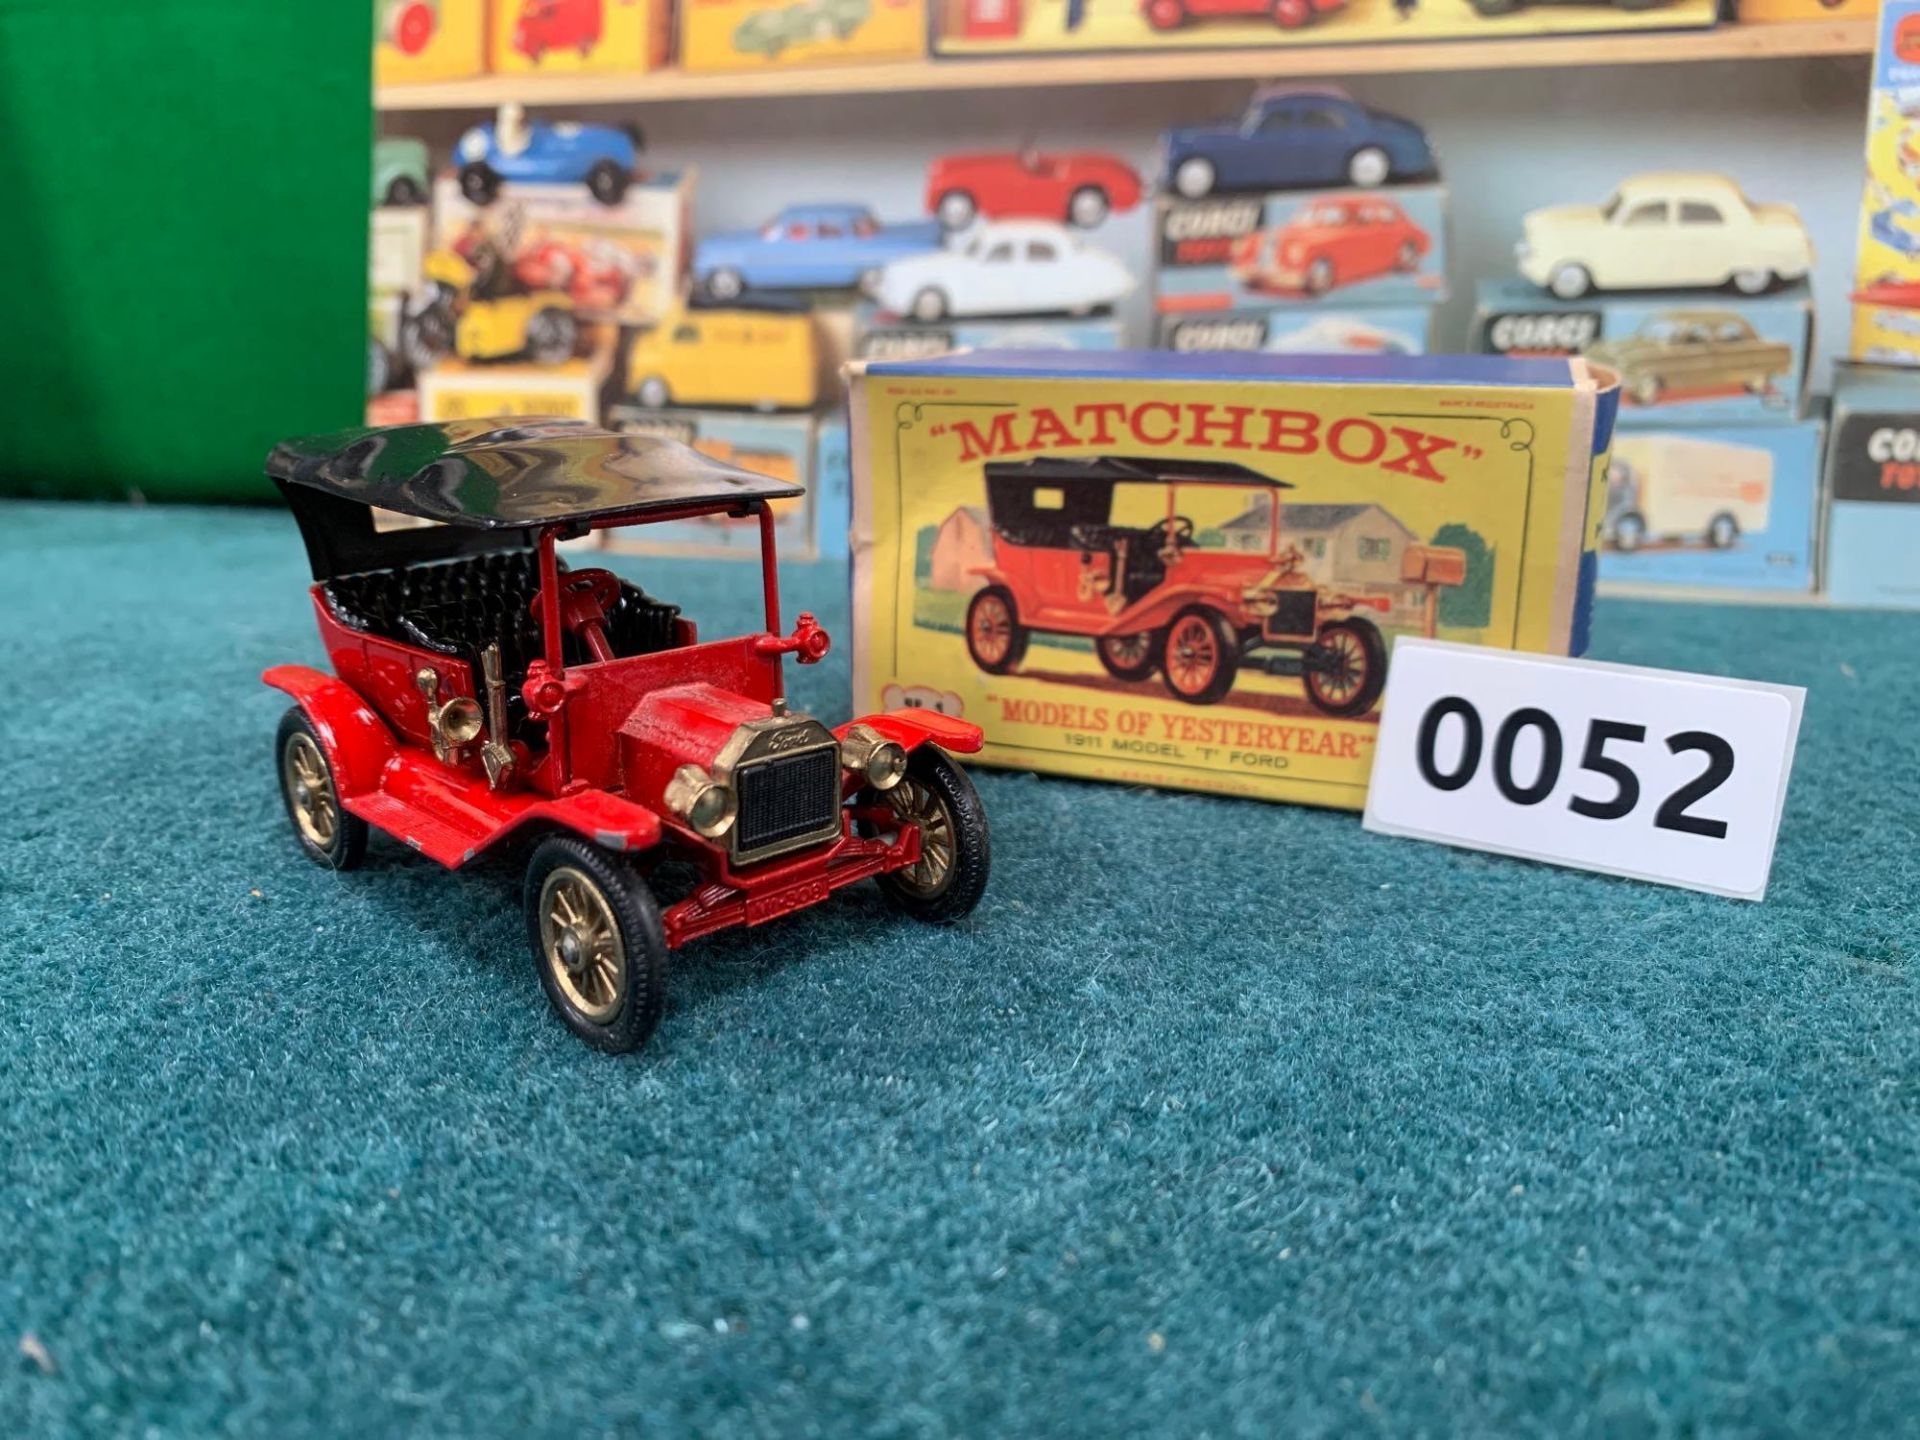 Matchbox Diecast Models Of Yesteryear #Y-1 1911Model T Ford In Box - Image 4 of 8